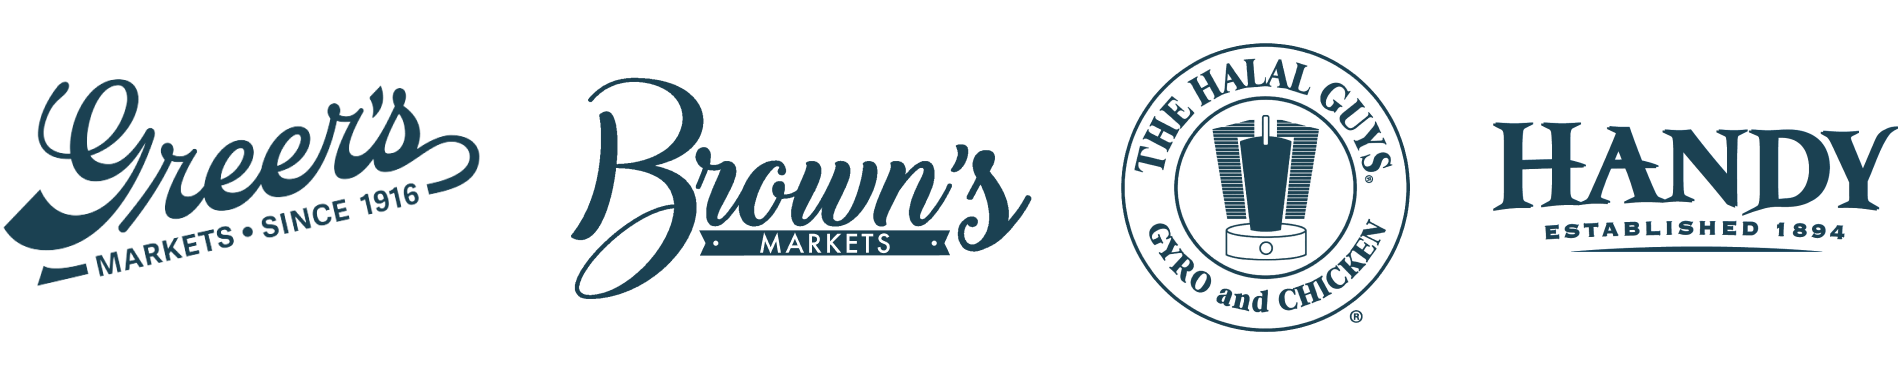 Logos for OpSense customers Greer's Markets, Brown's Markets, The Halala Guys, and Handy